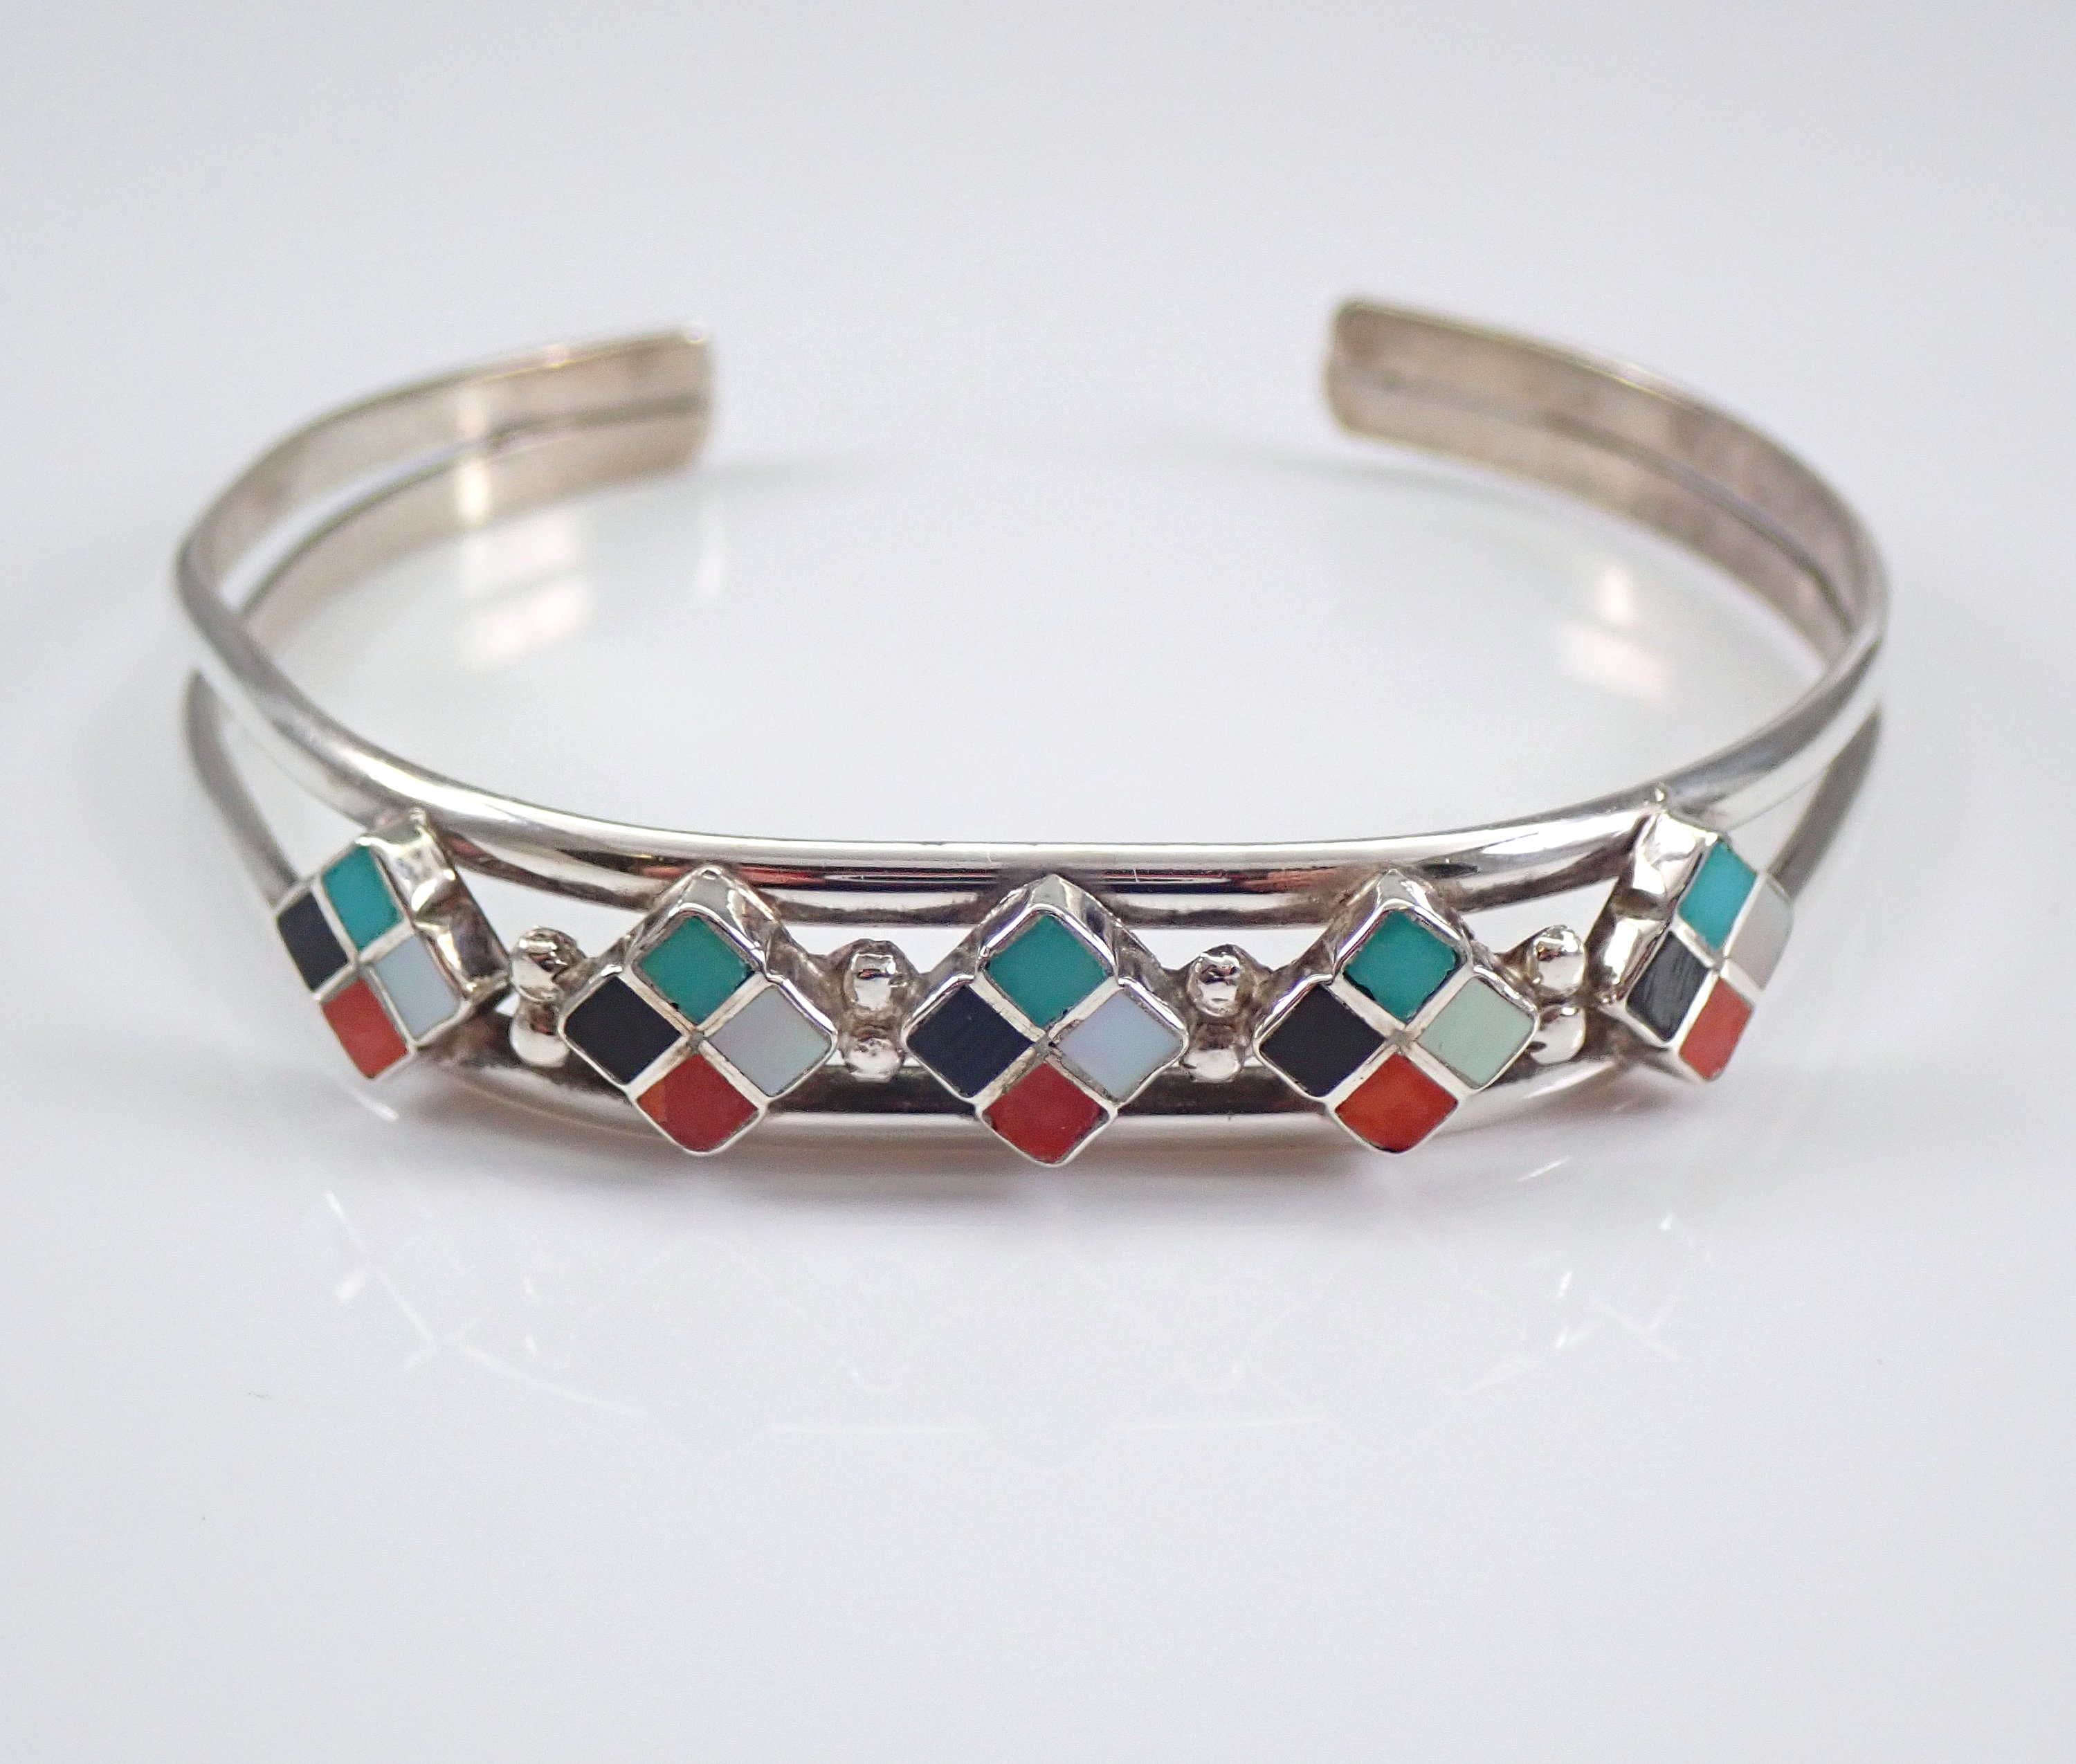 Vintage Sterling Silver Bangle Bracelet, Multi Color Gemstone Cuff, Onyx  Turquoise Coral and Mother of Pearl, Tribal Native American Jewelry